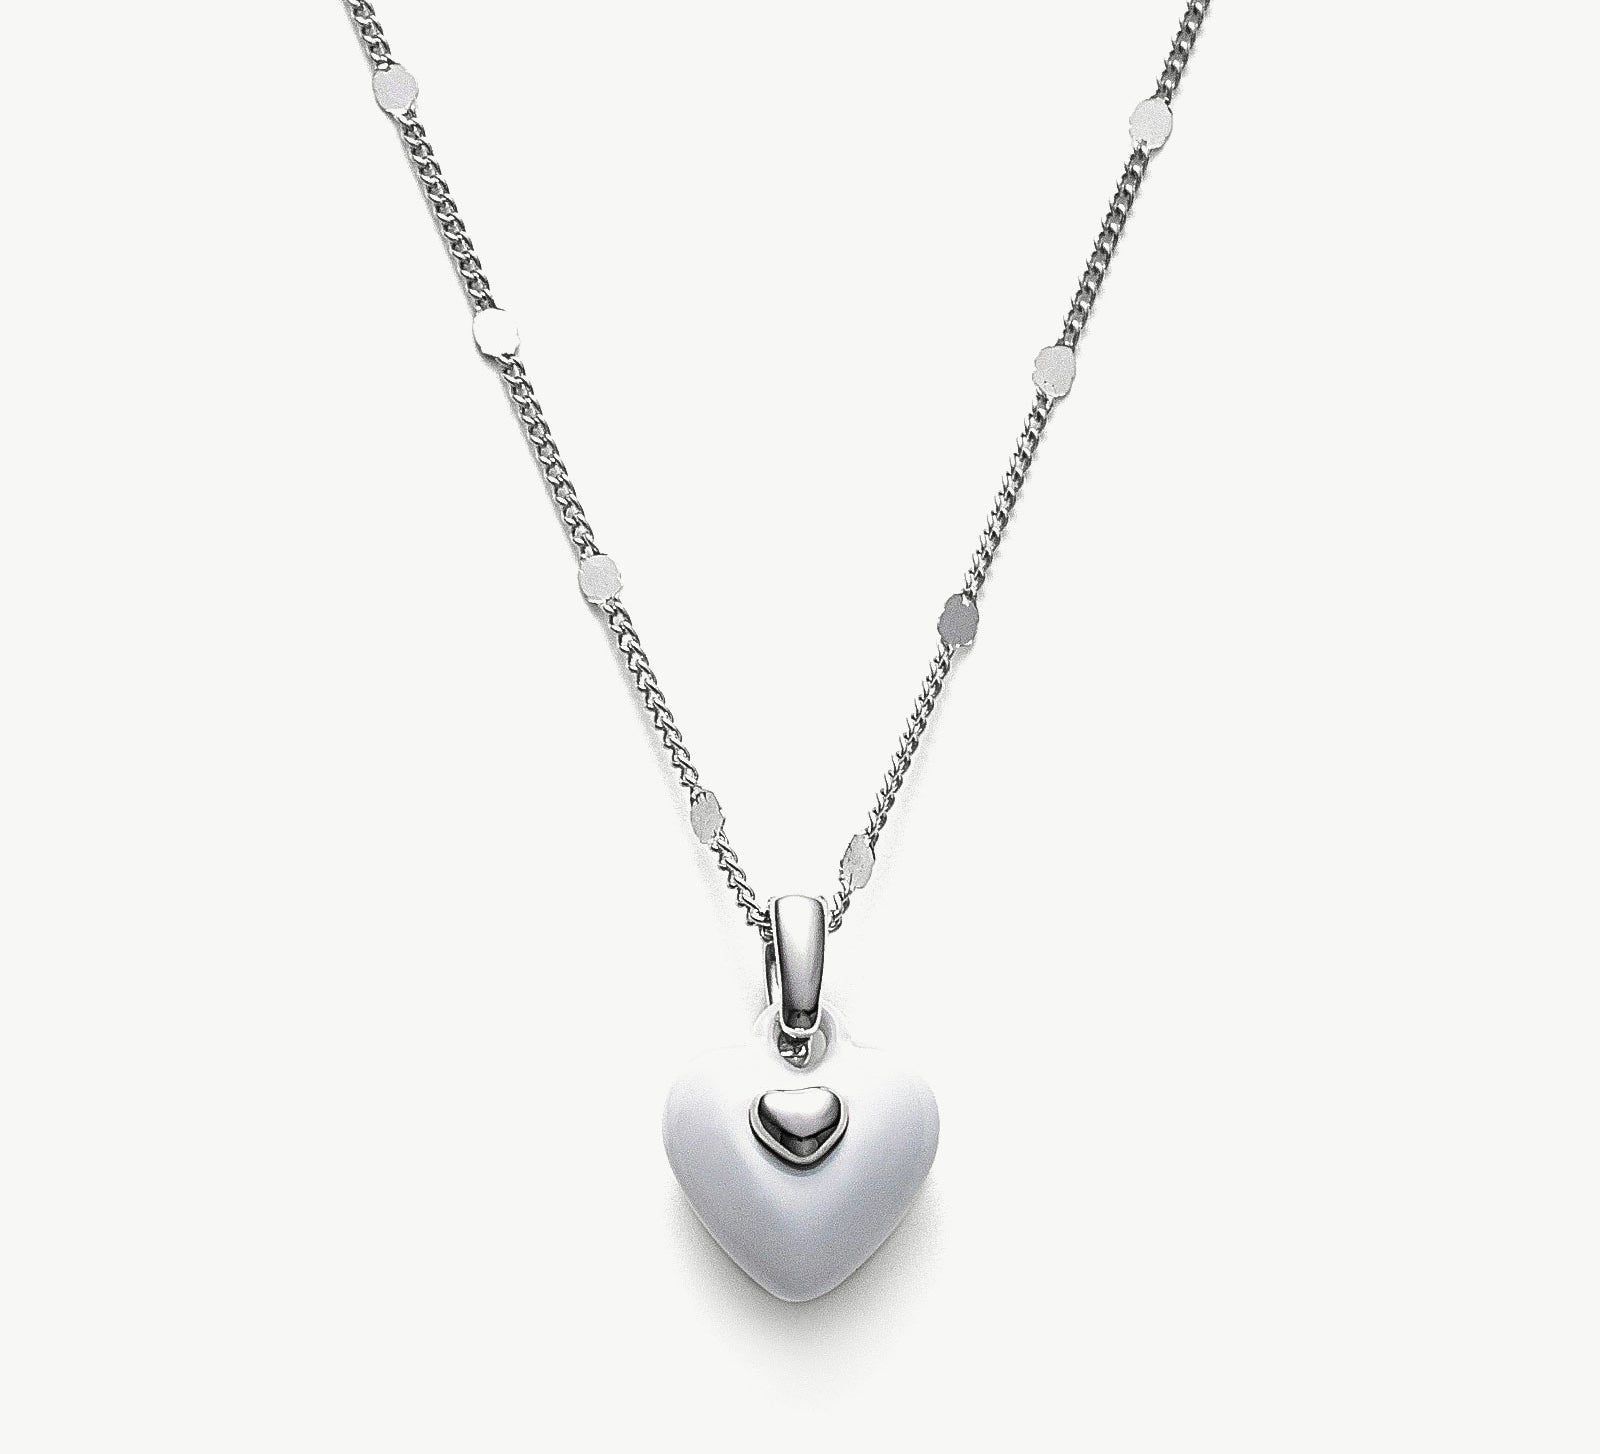 Onyx Heart Pendant Necklace, a timeless piece featuring a heart-shaped onyx pendant in pure white, adding a touch of elegance and sophistication to your neckline.